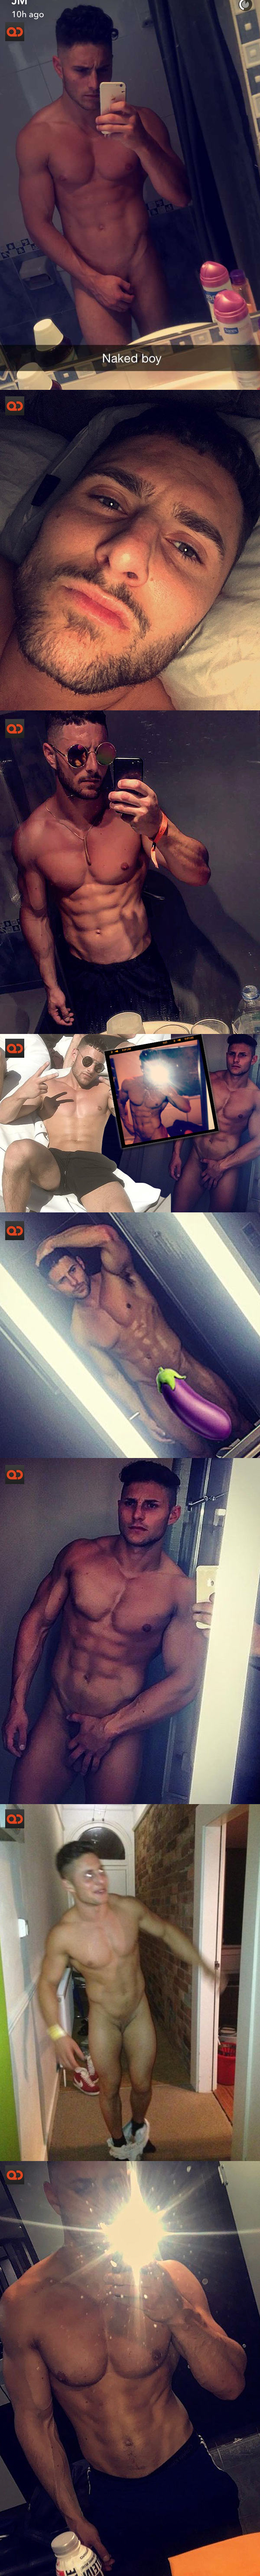 James Moore Is Back To His Naked Antics, New Uncensored Photos Of The EOTB  Star Leak!